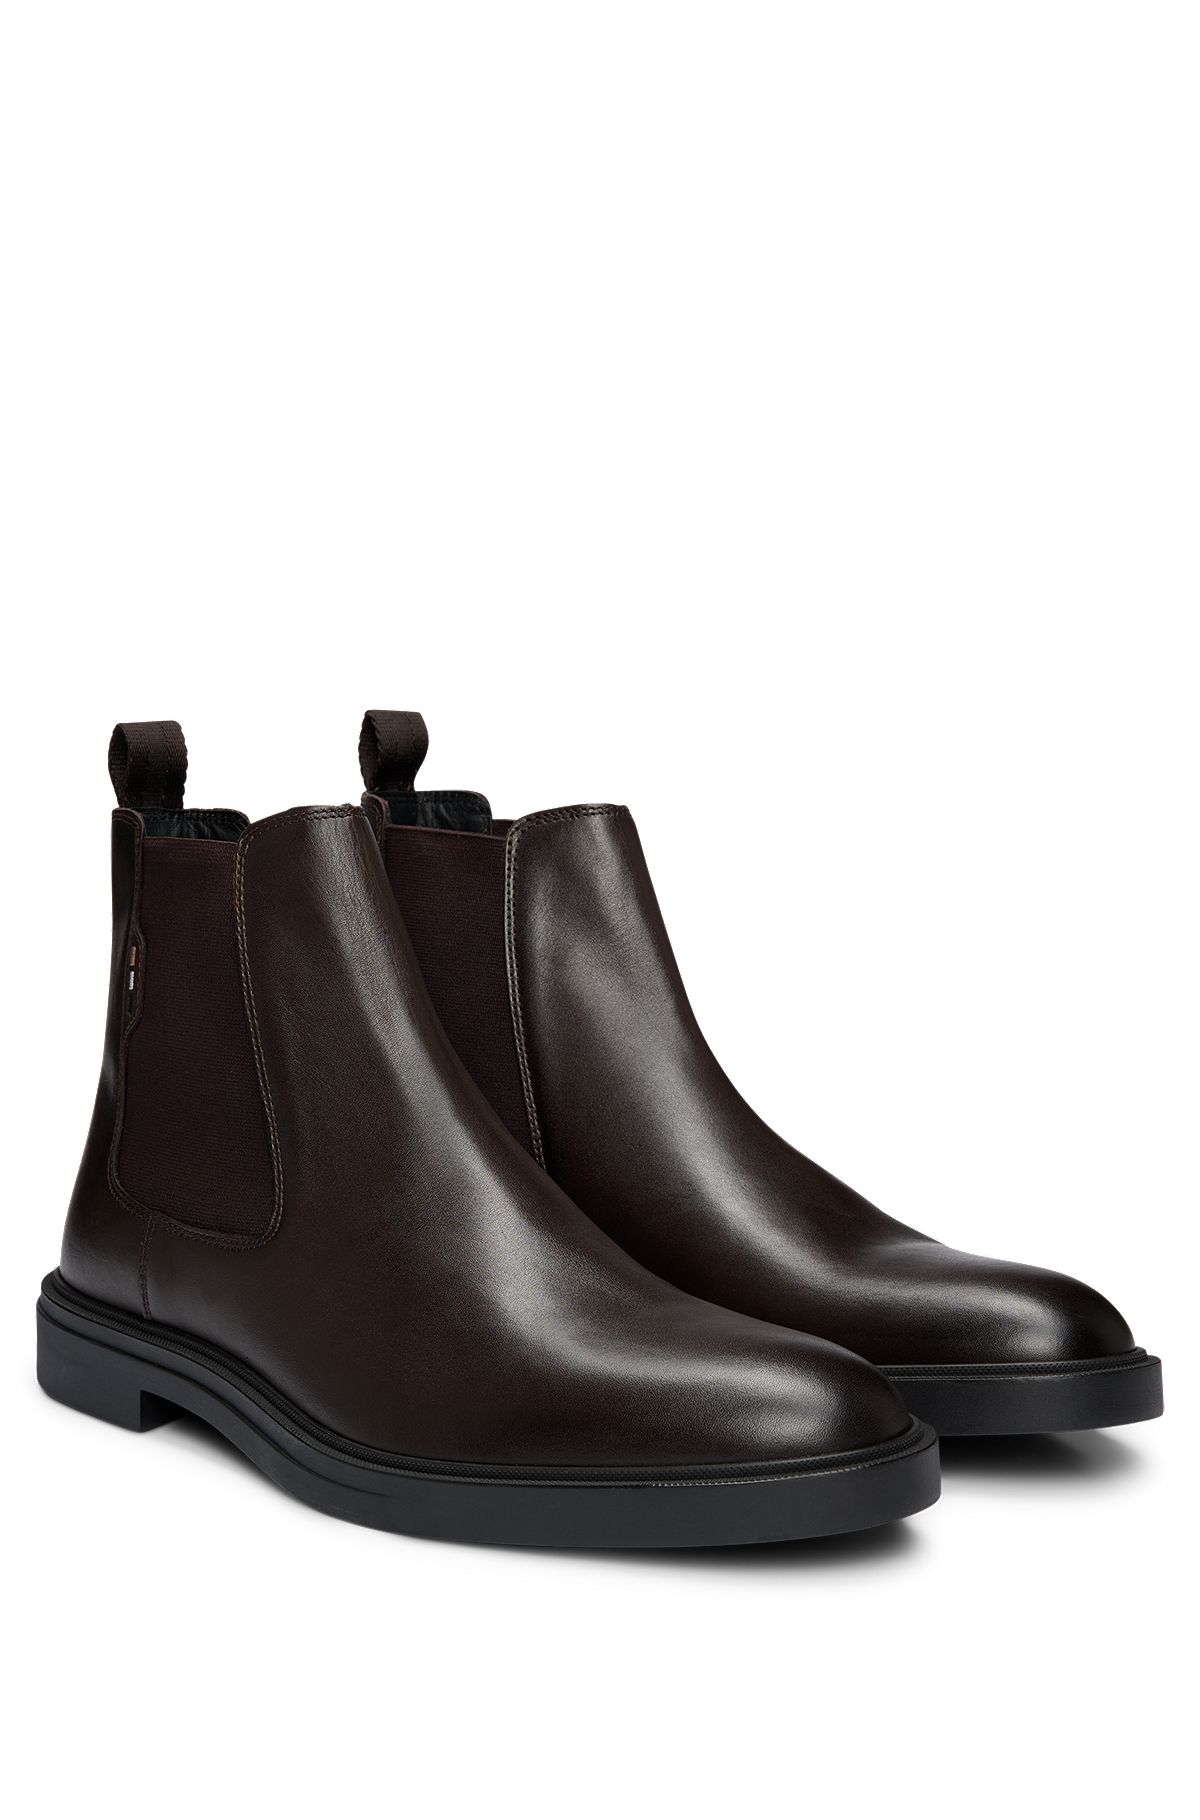 Leather Chelsea boots with signature-stripe detail, Dark Brown